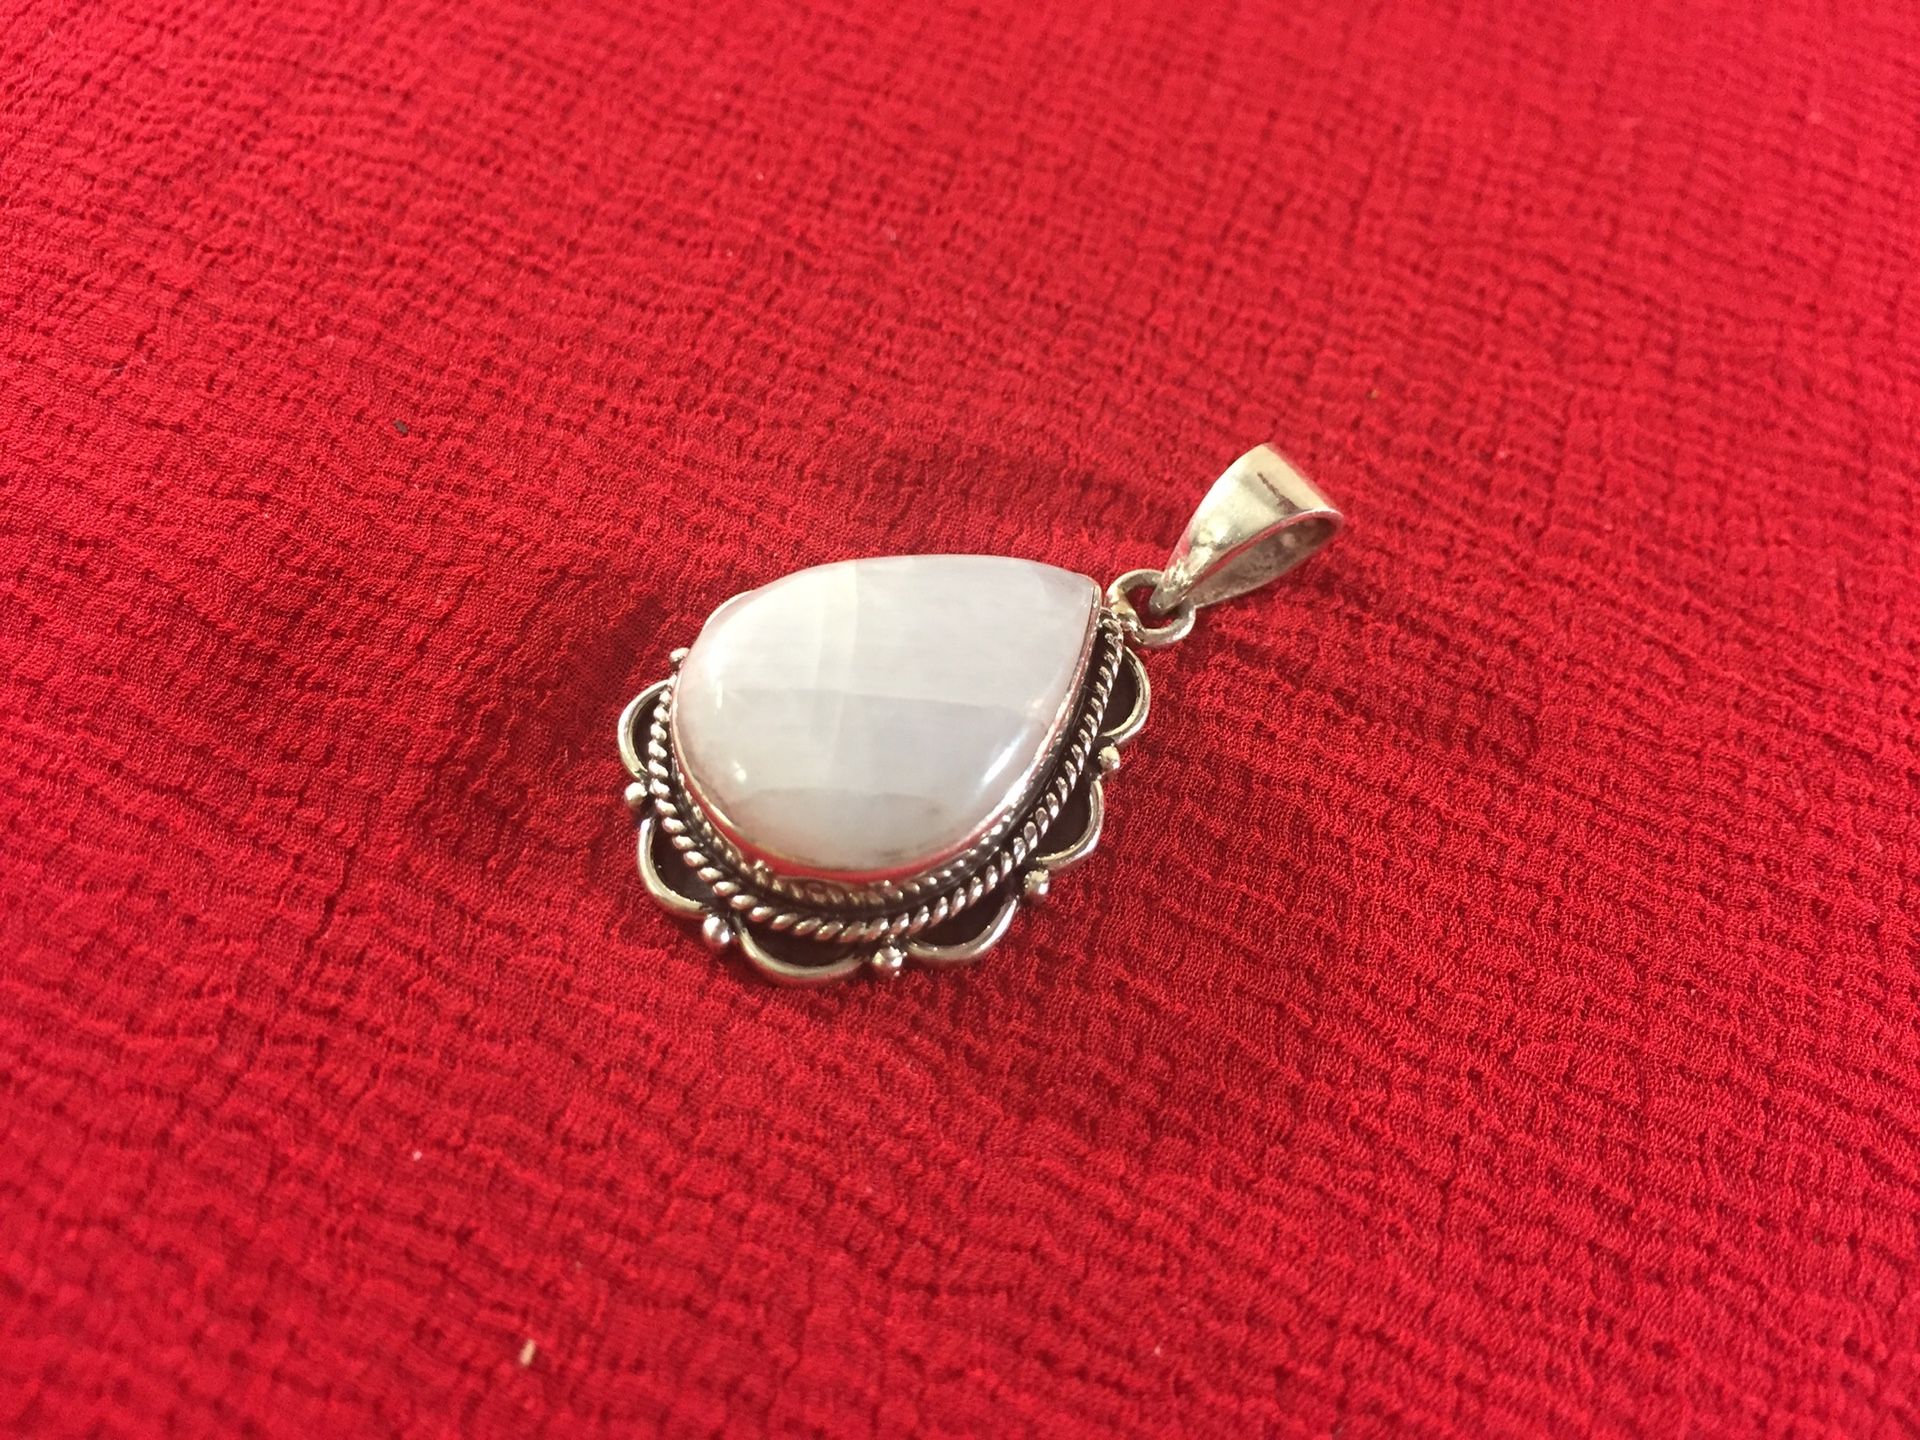 Handcrafted 925 stamped sterling silver pendant with moonstone